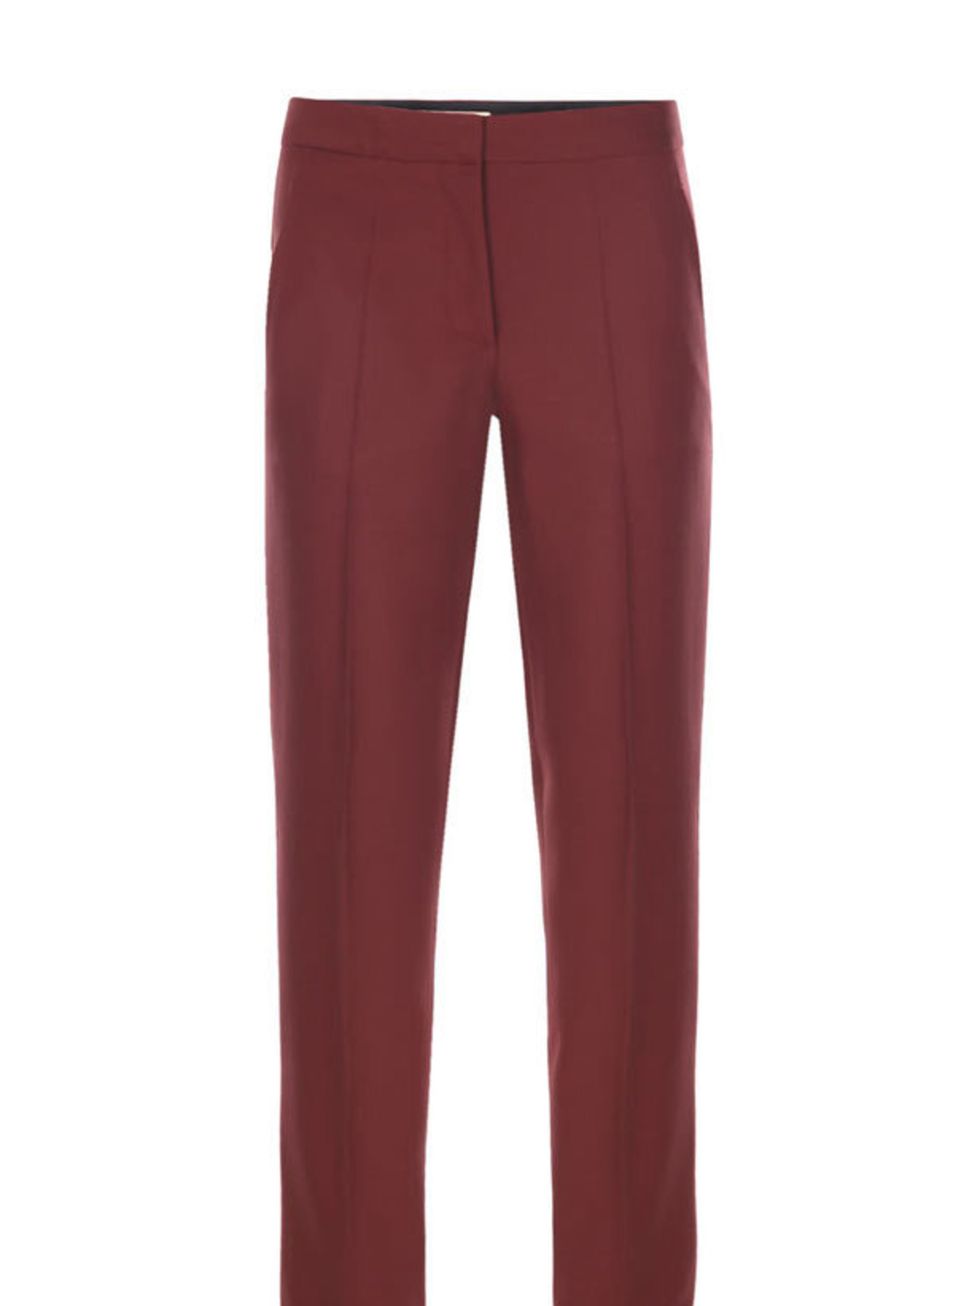 <p>Stella McCartney tailored tux trousers, £330, at <a href="http://www.matchesfashion.com/fcp/product/Matches-Fashion/womens_stella_mccartney/stella-mccartney-sm-b-272585-sk700-trousers-RED/51485">Matches Fashion</a></p>